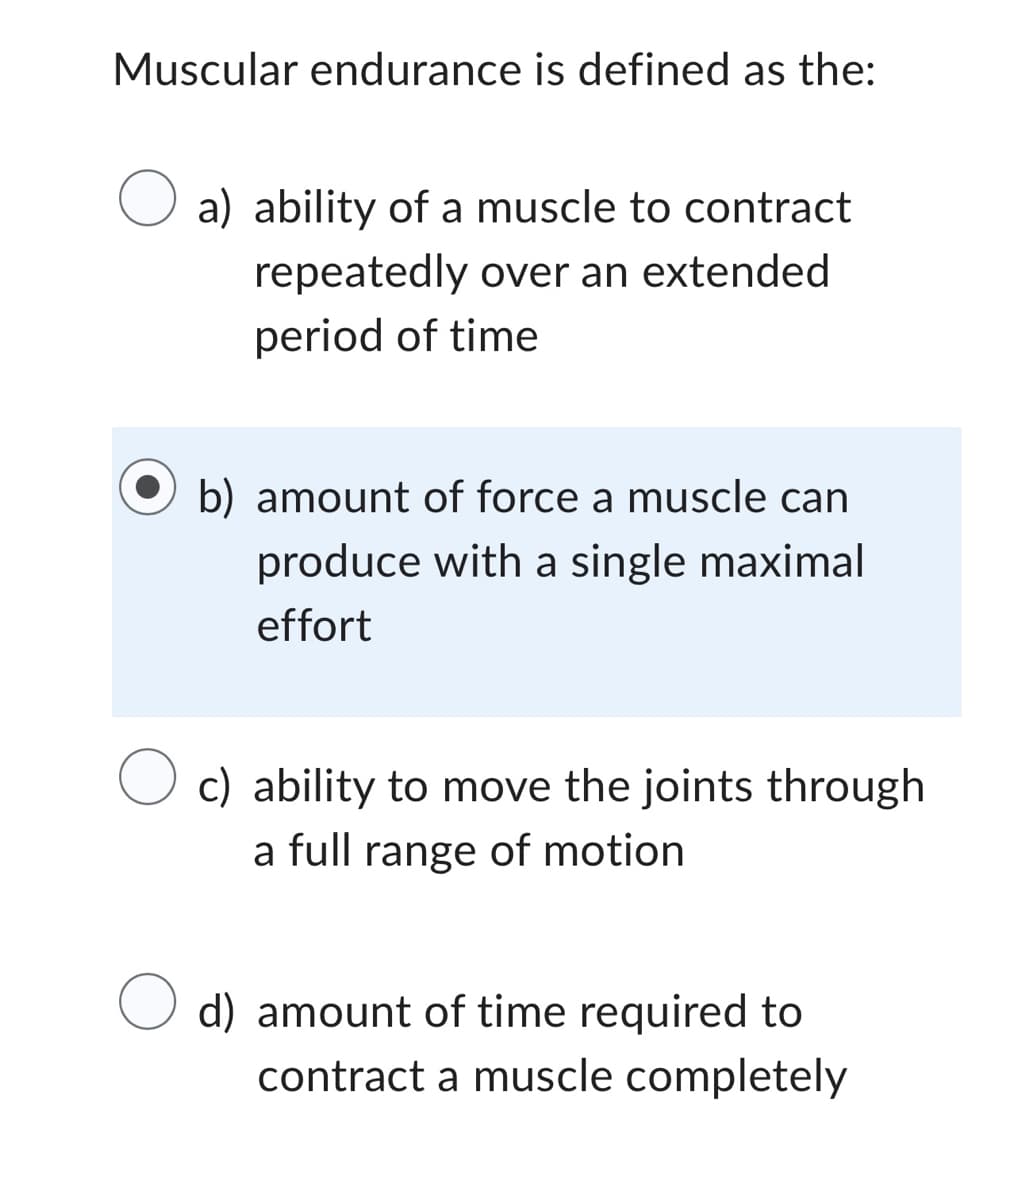 Muscular endurance is defined as the:
O a) ability of a muscle to contract
repeatedly over an extended
period of time
b) amount of force a muscle can
produce with a single maximal
effort
O c) ability to move the joints through
a full range of motion
O d) amount of time required to
contract a muscle completely